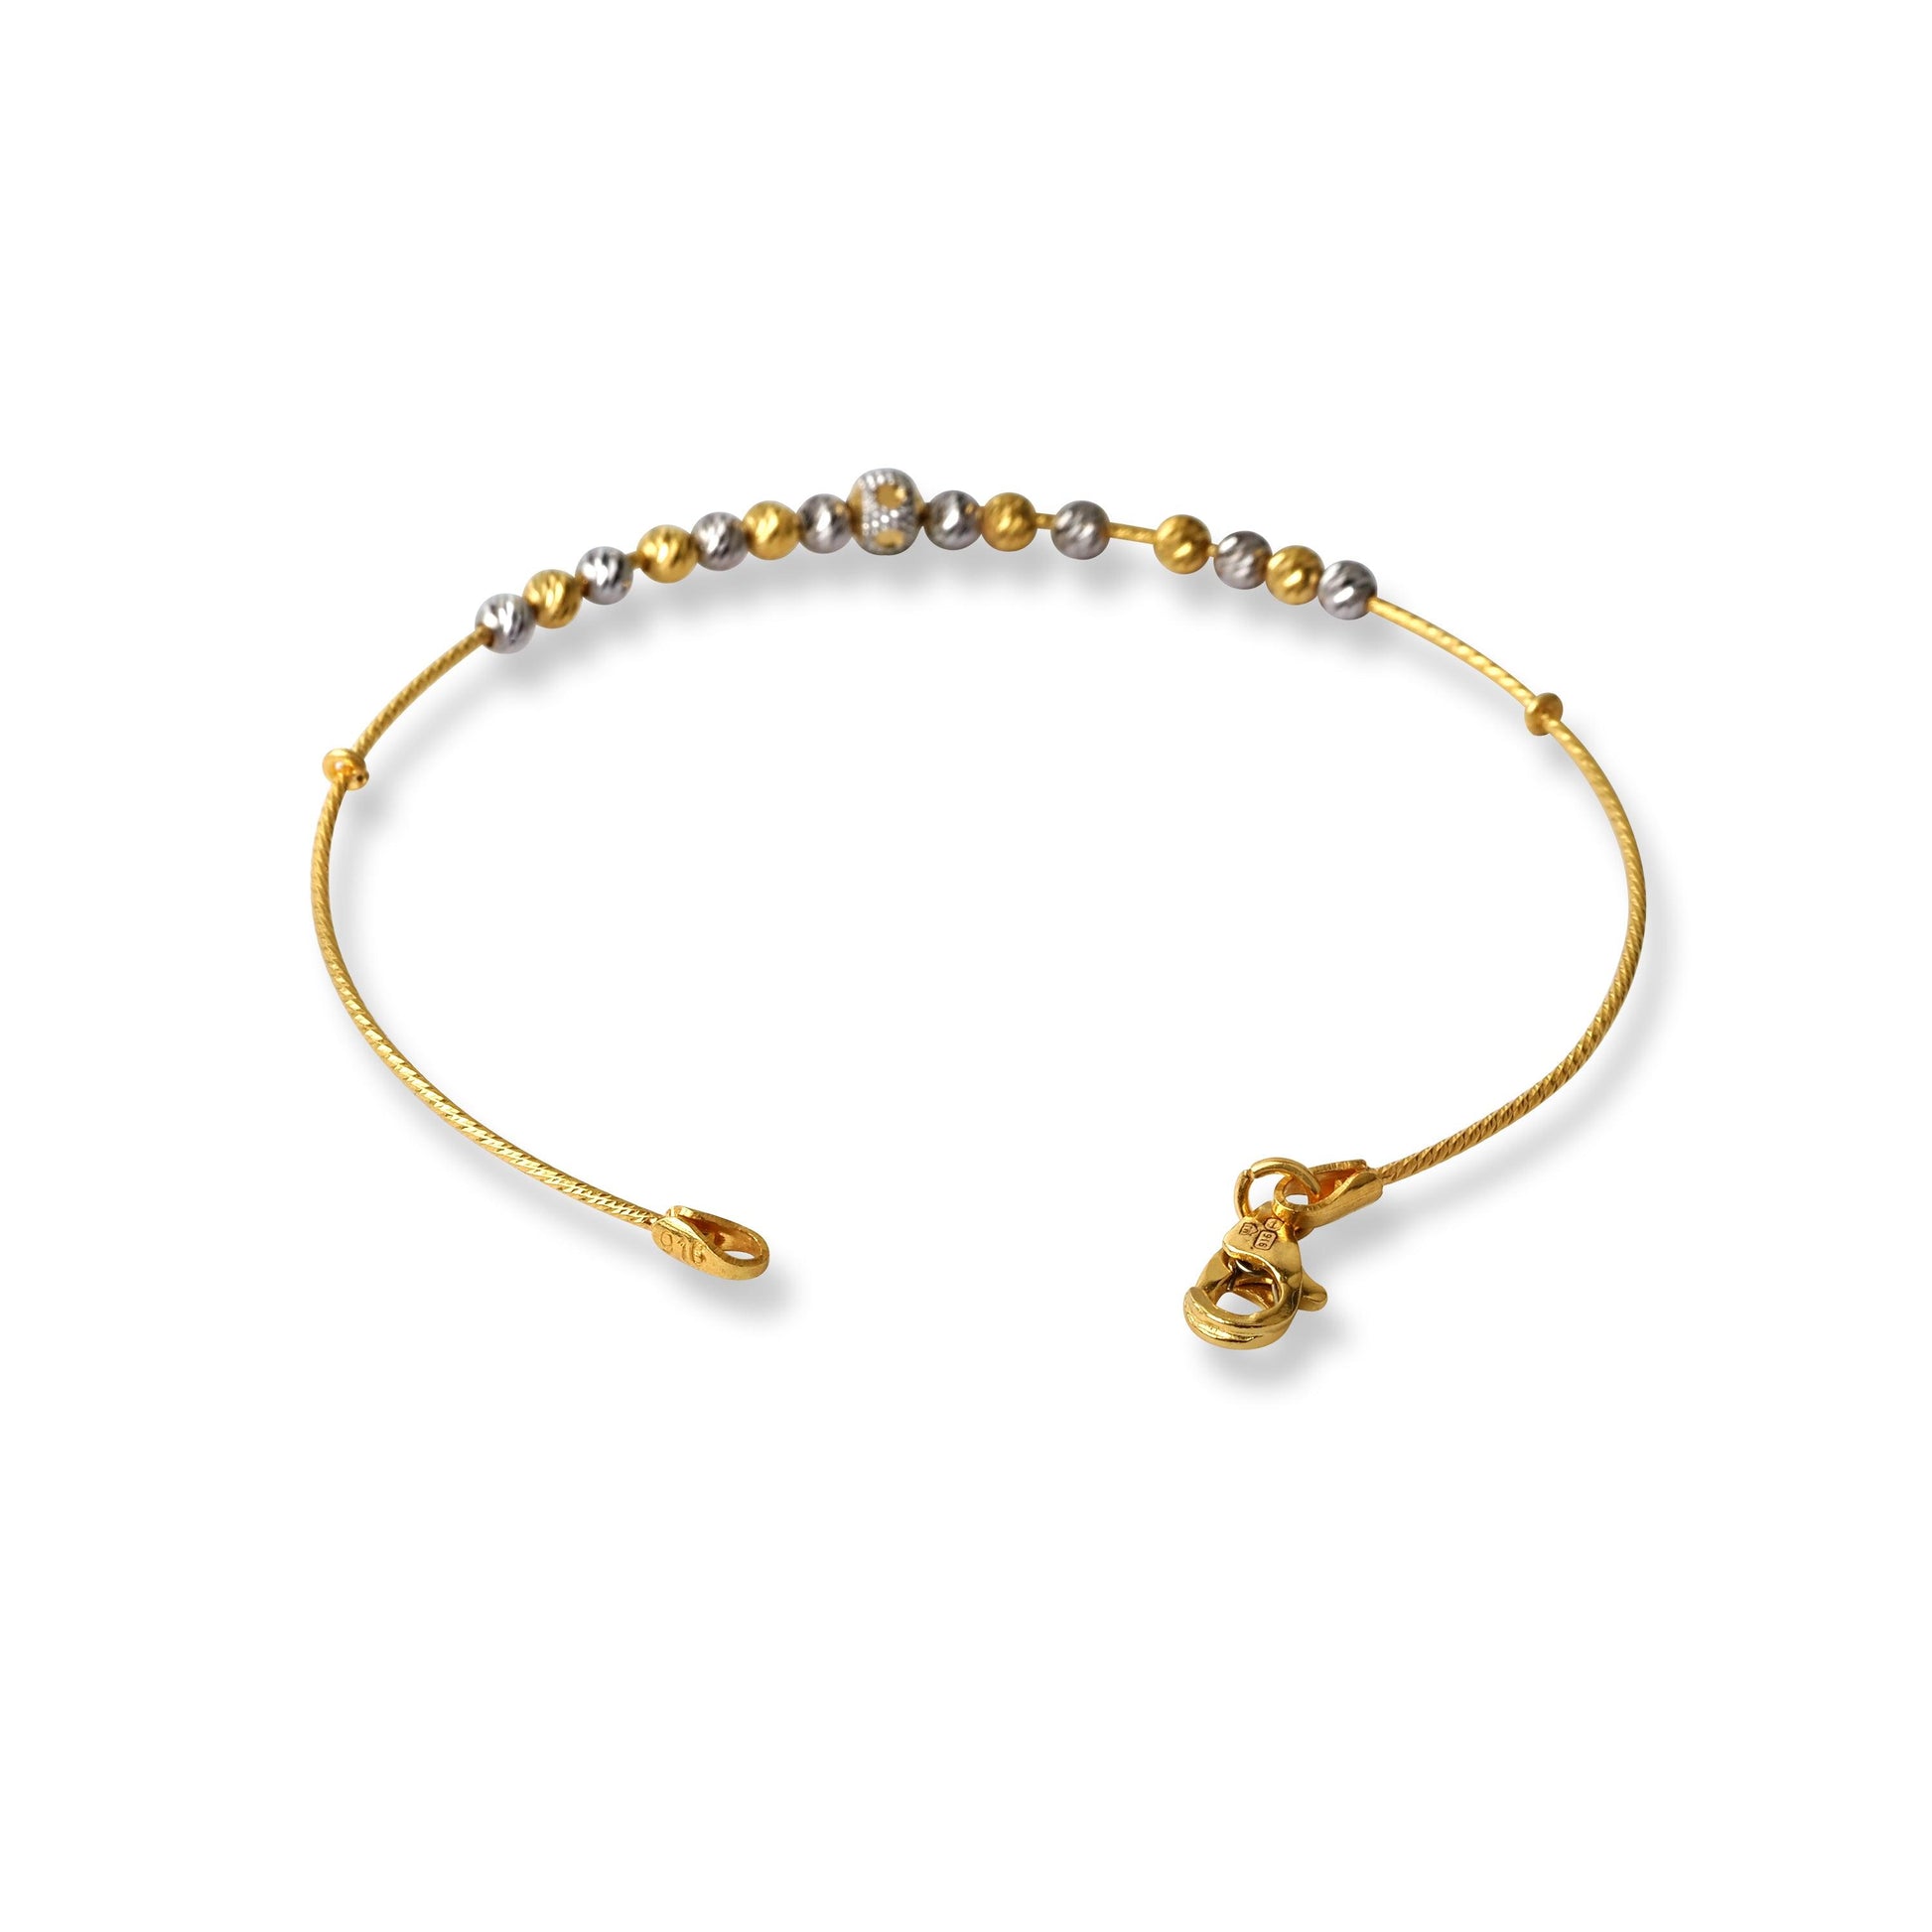 22ct Gold Rhodium Plated Beads Bangle With Rounded Trigger Clasp (4.1g) B-8523 - Minar Jewellers